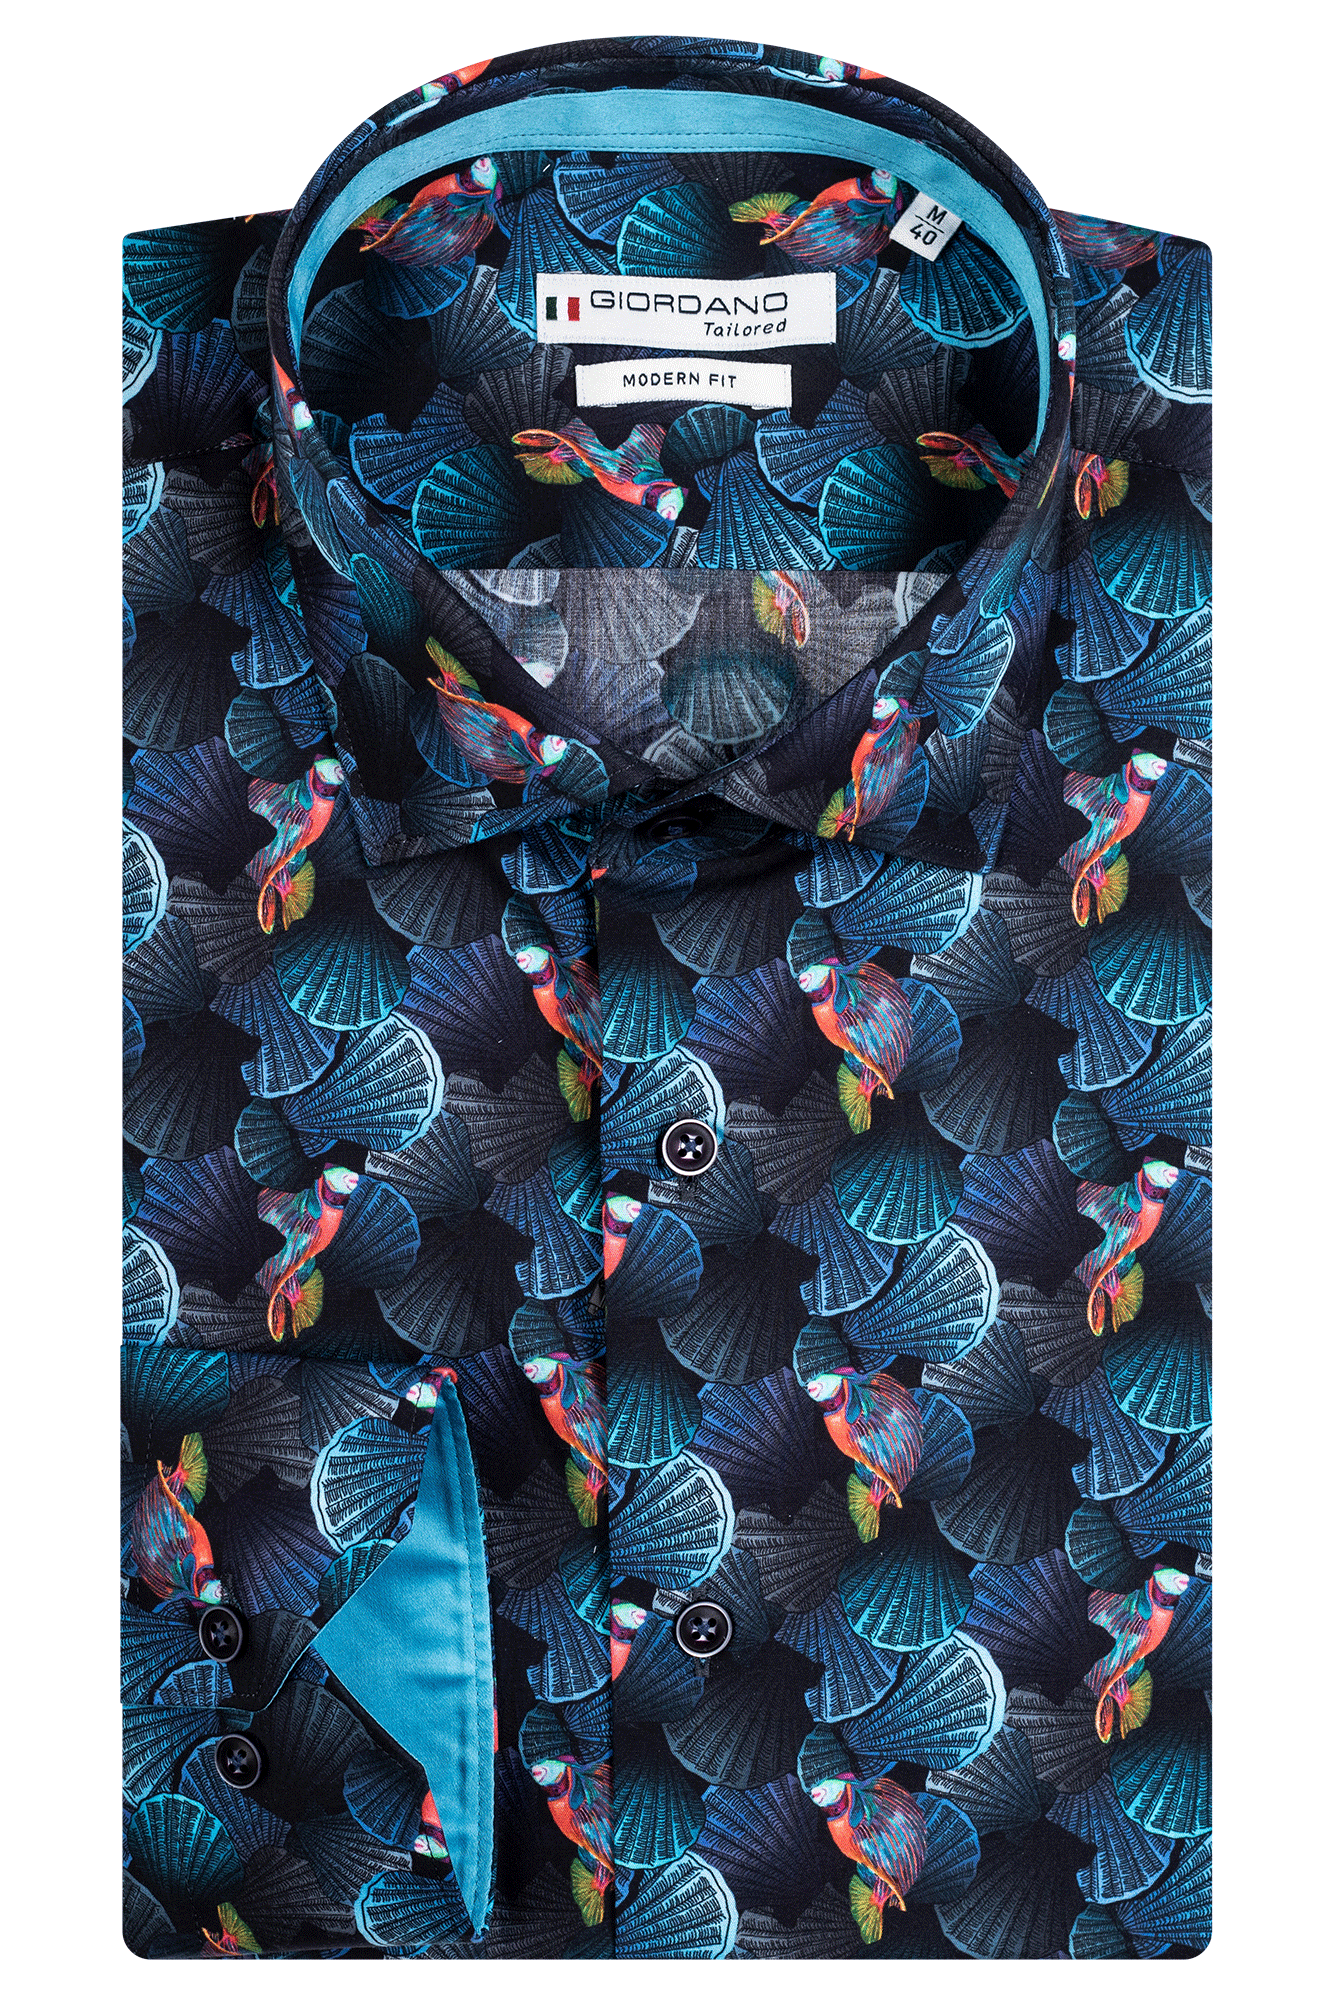 Shell and fish Liberty fabric by Giordano